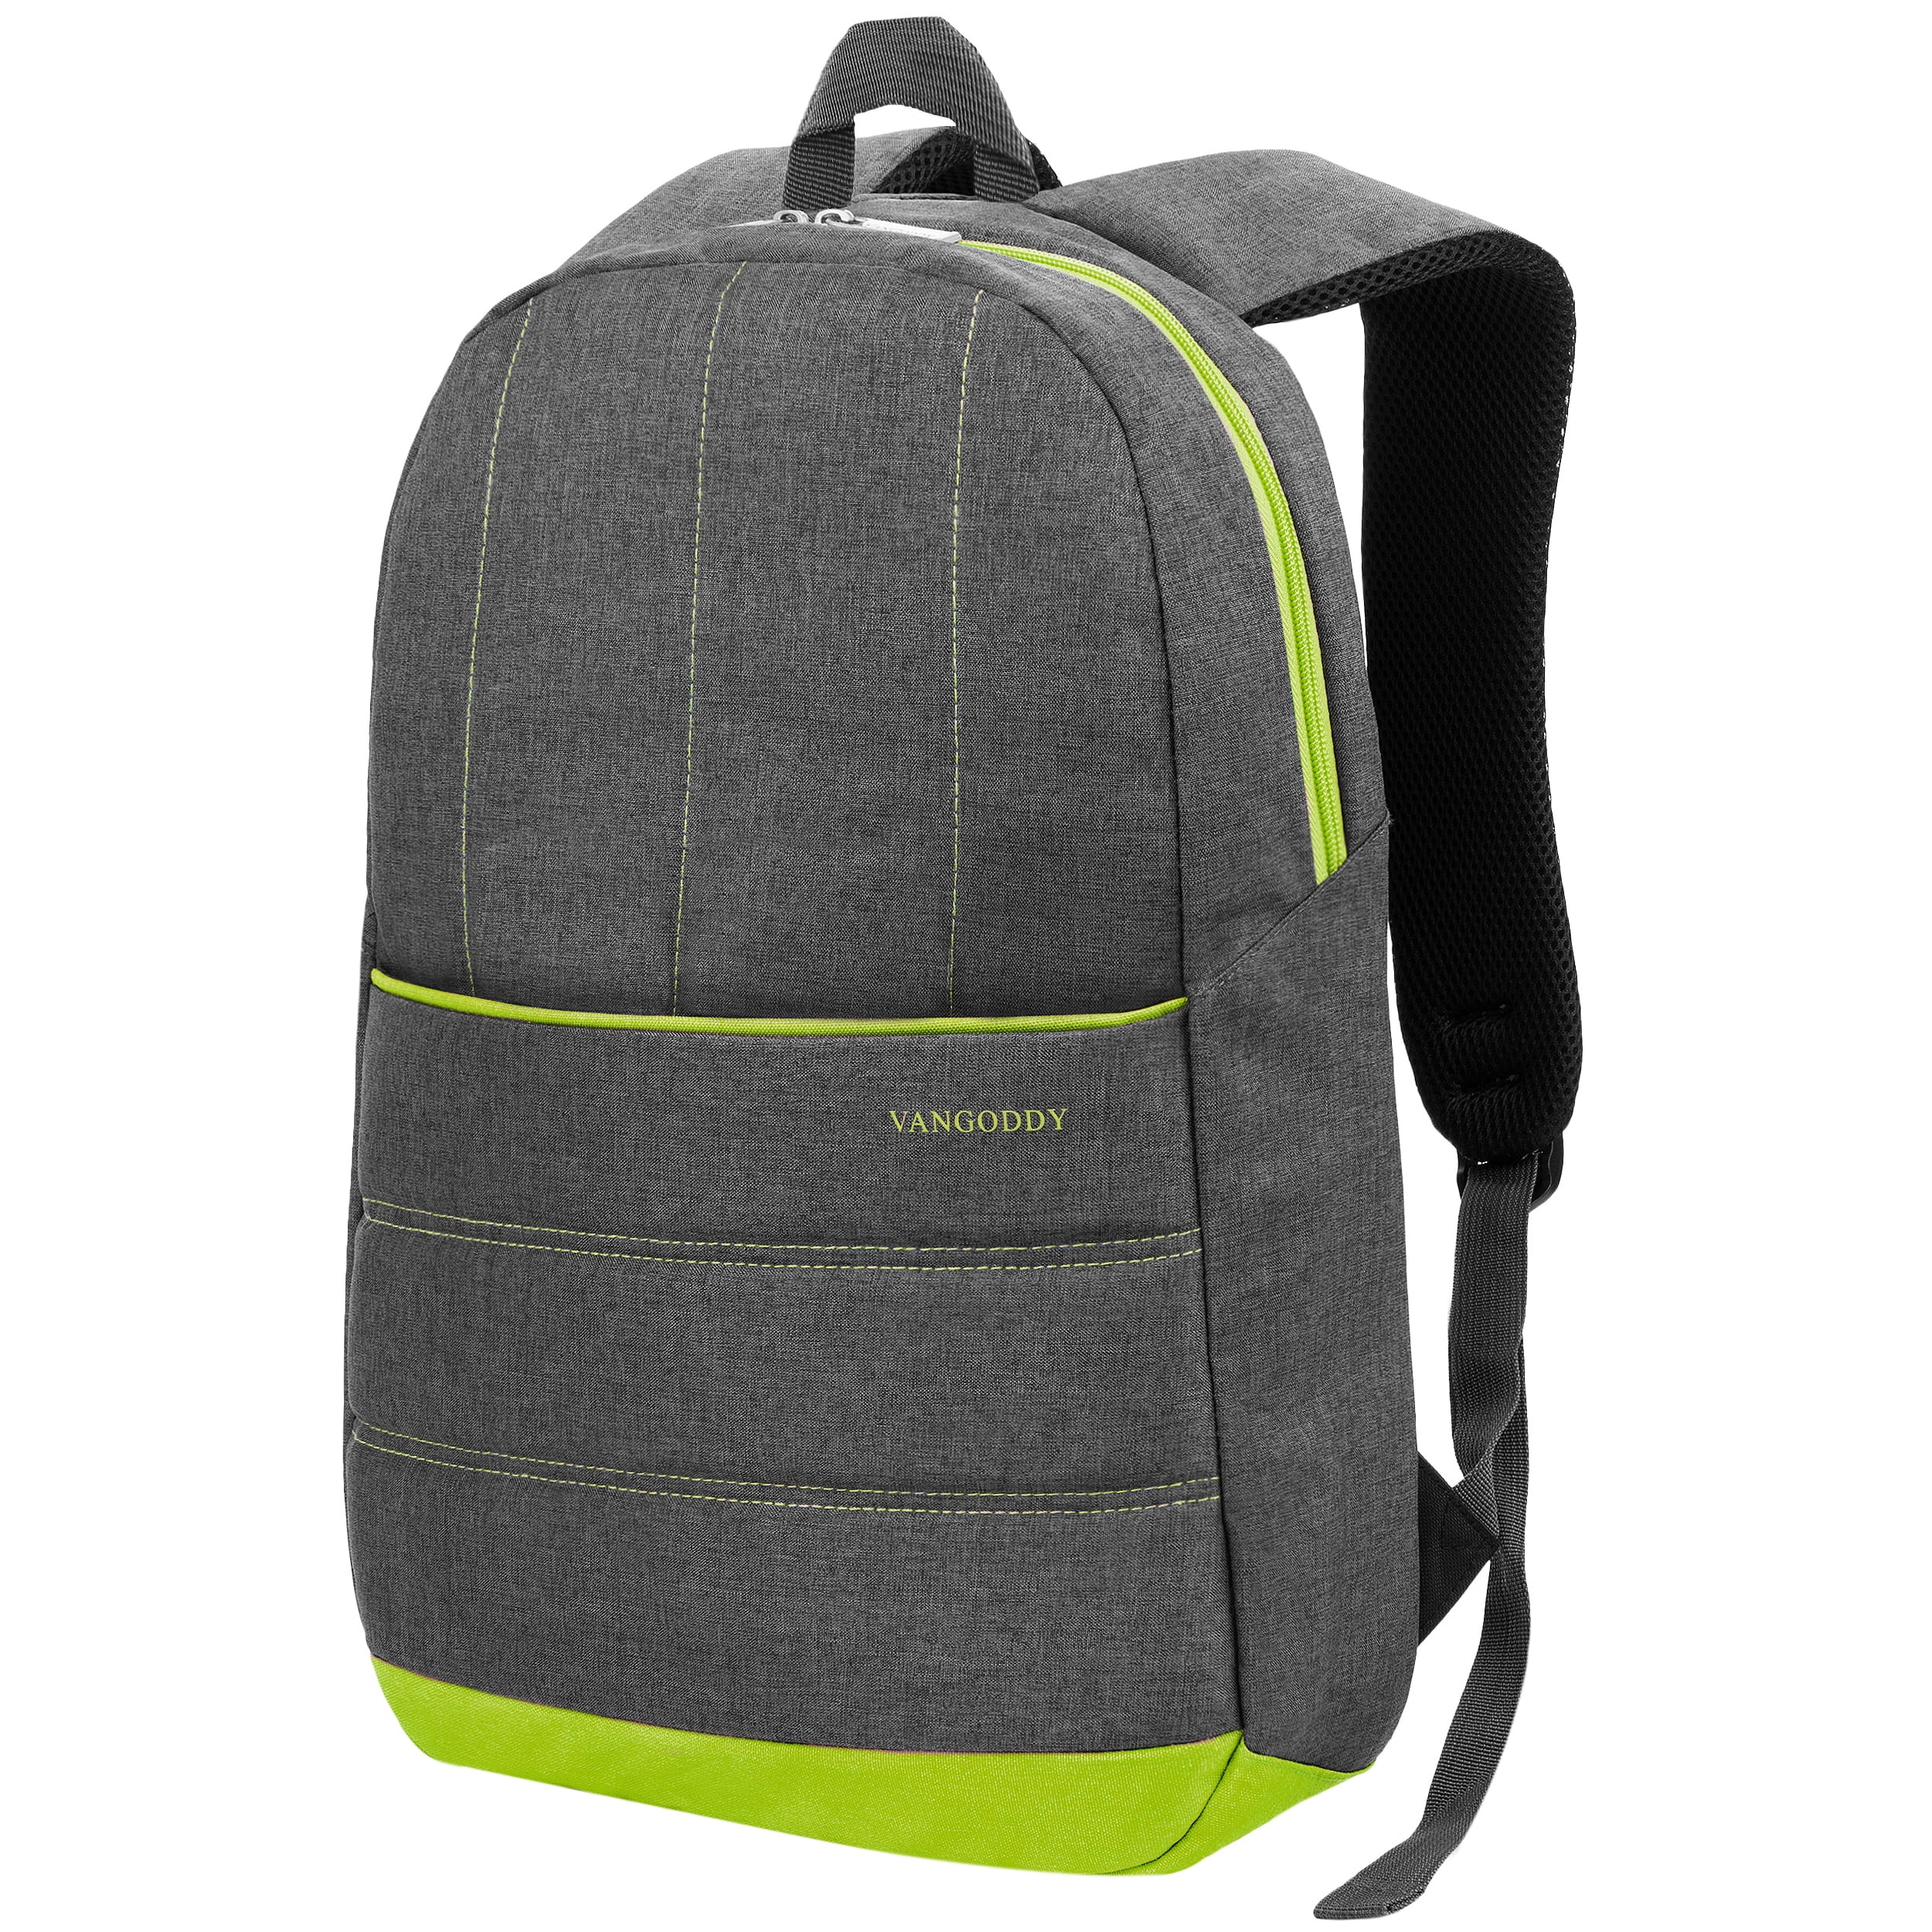 VanGoddy Laptop Notebook Backpack School Bag For 15.6" Dell Inspiron 15 XPS 15 